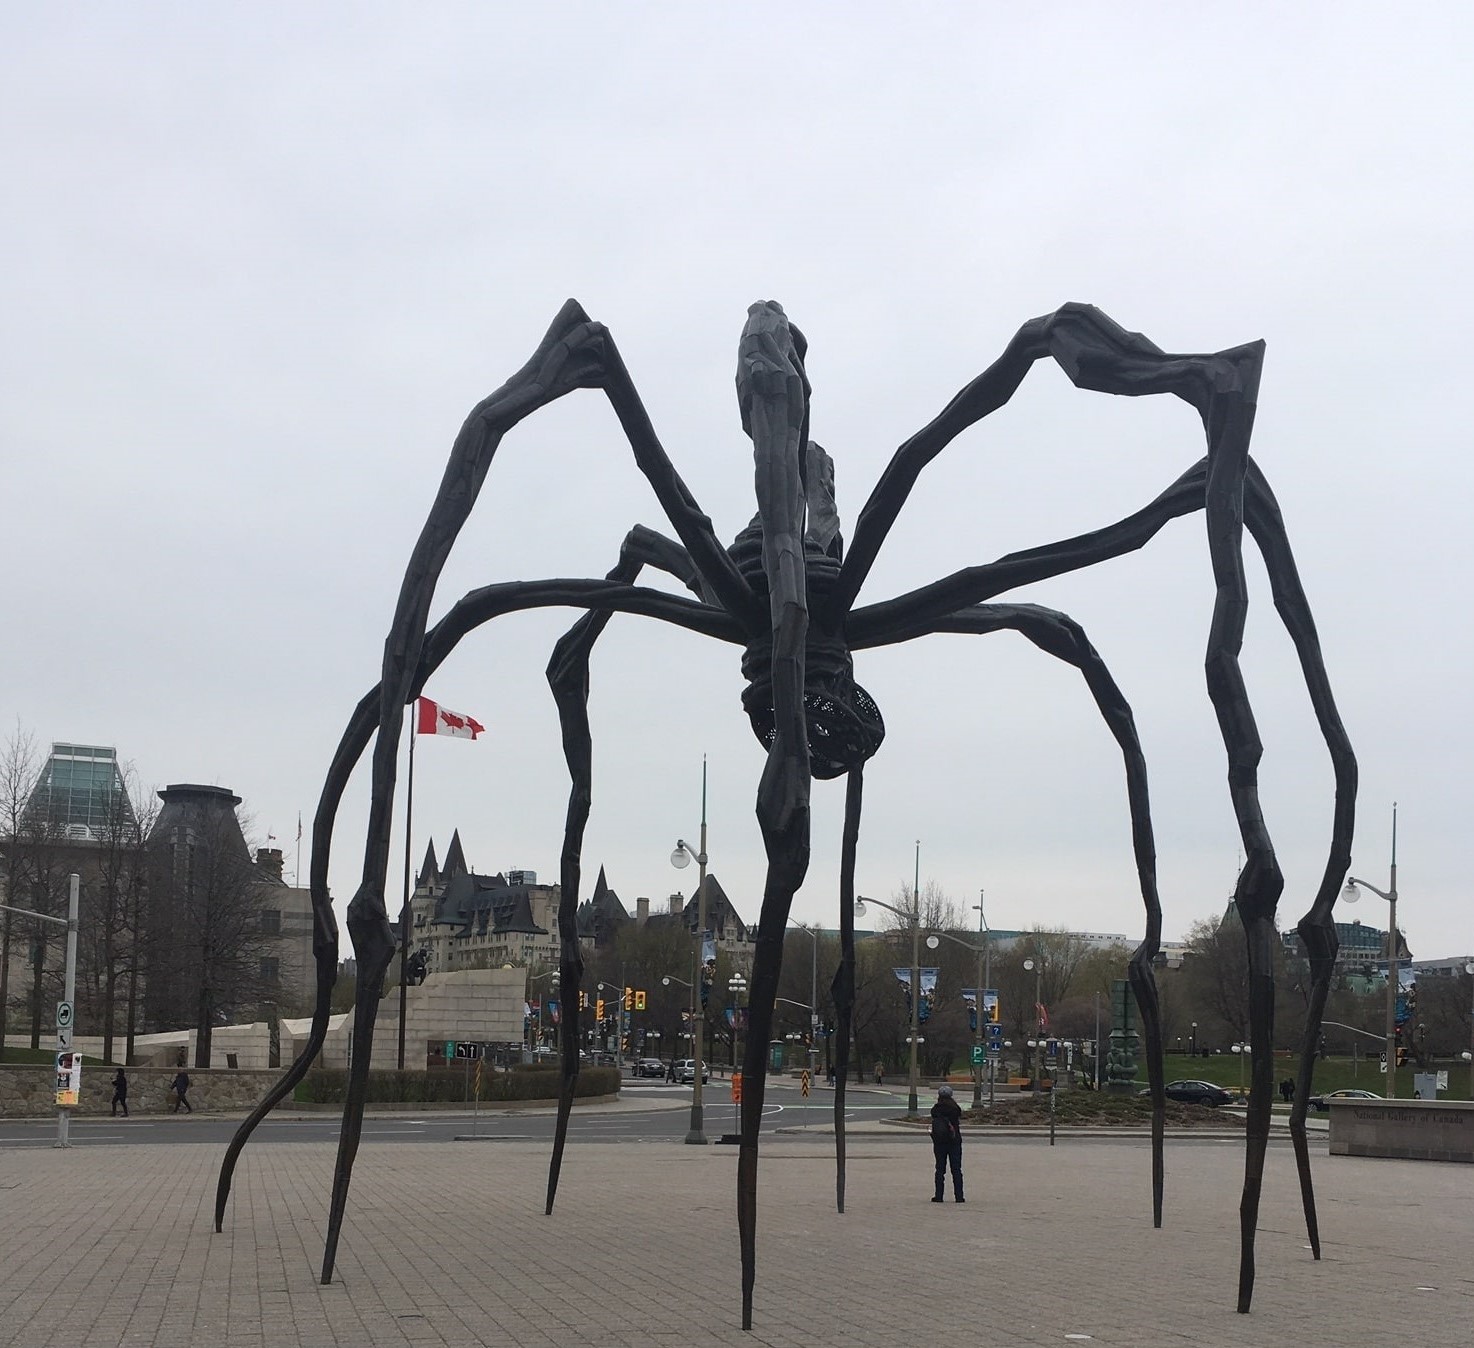 Maman the giant spider outside the National Gallery of Canada